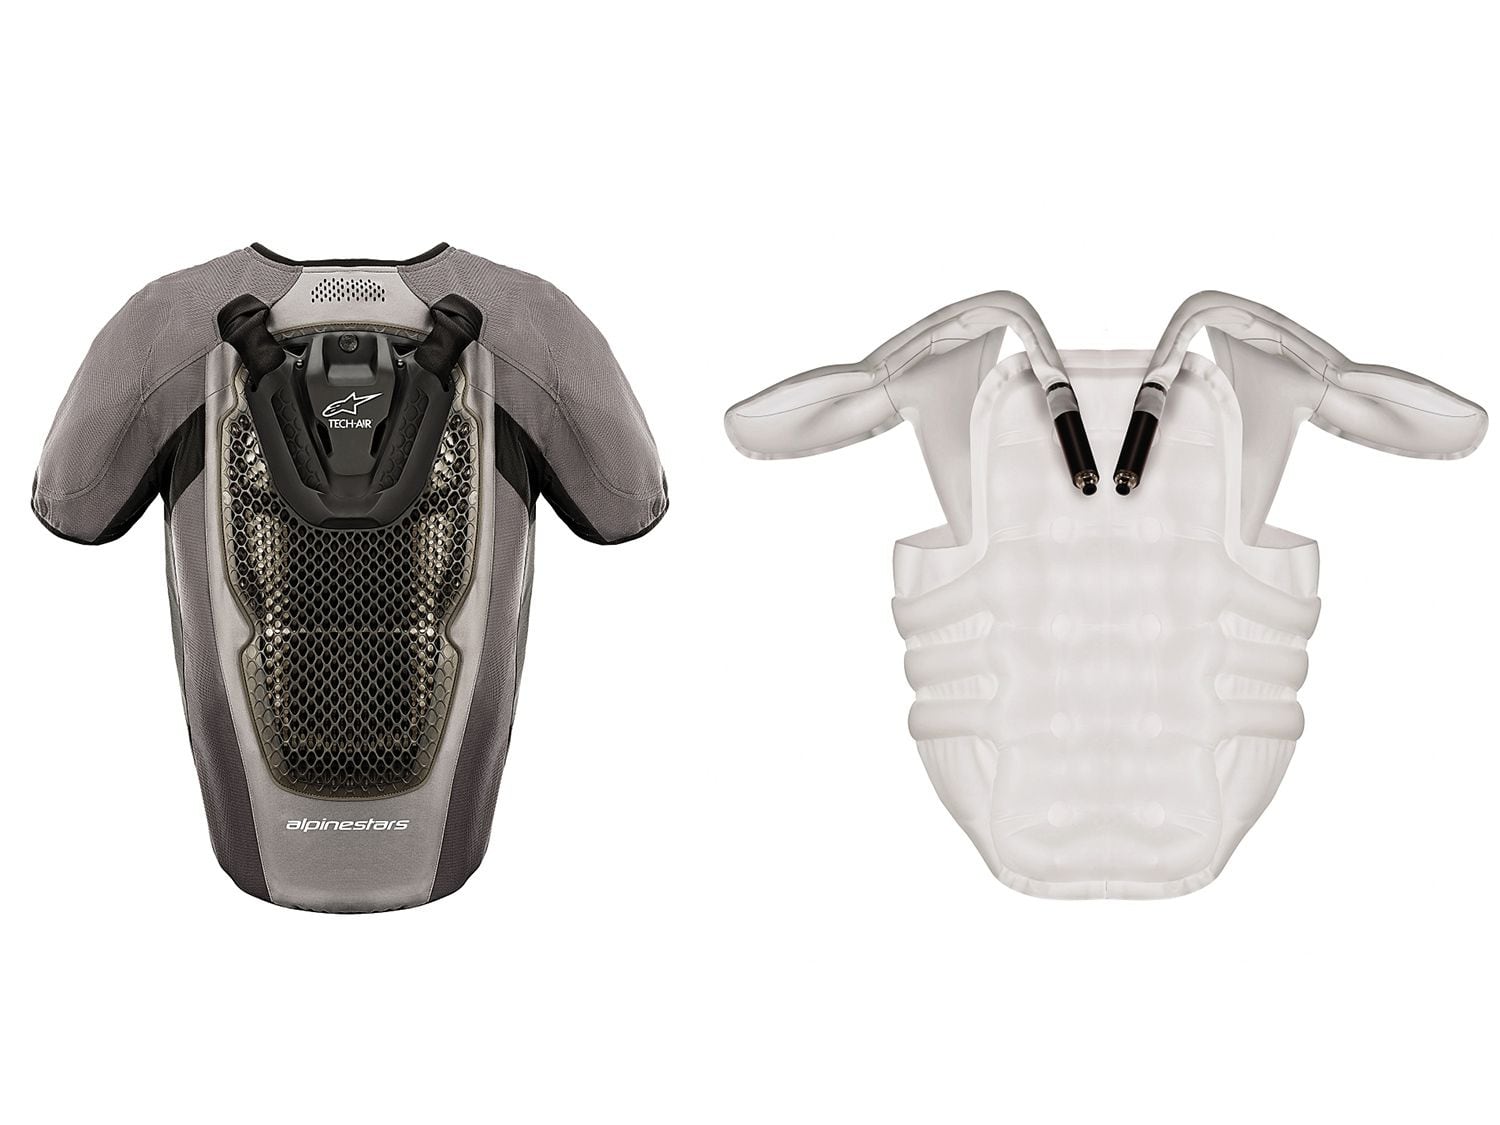 Multiple companies including Alpinestars currently have lines of airbag-compatible clothing and vests that can be worn under conventional jackets or racing suits.